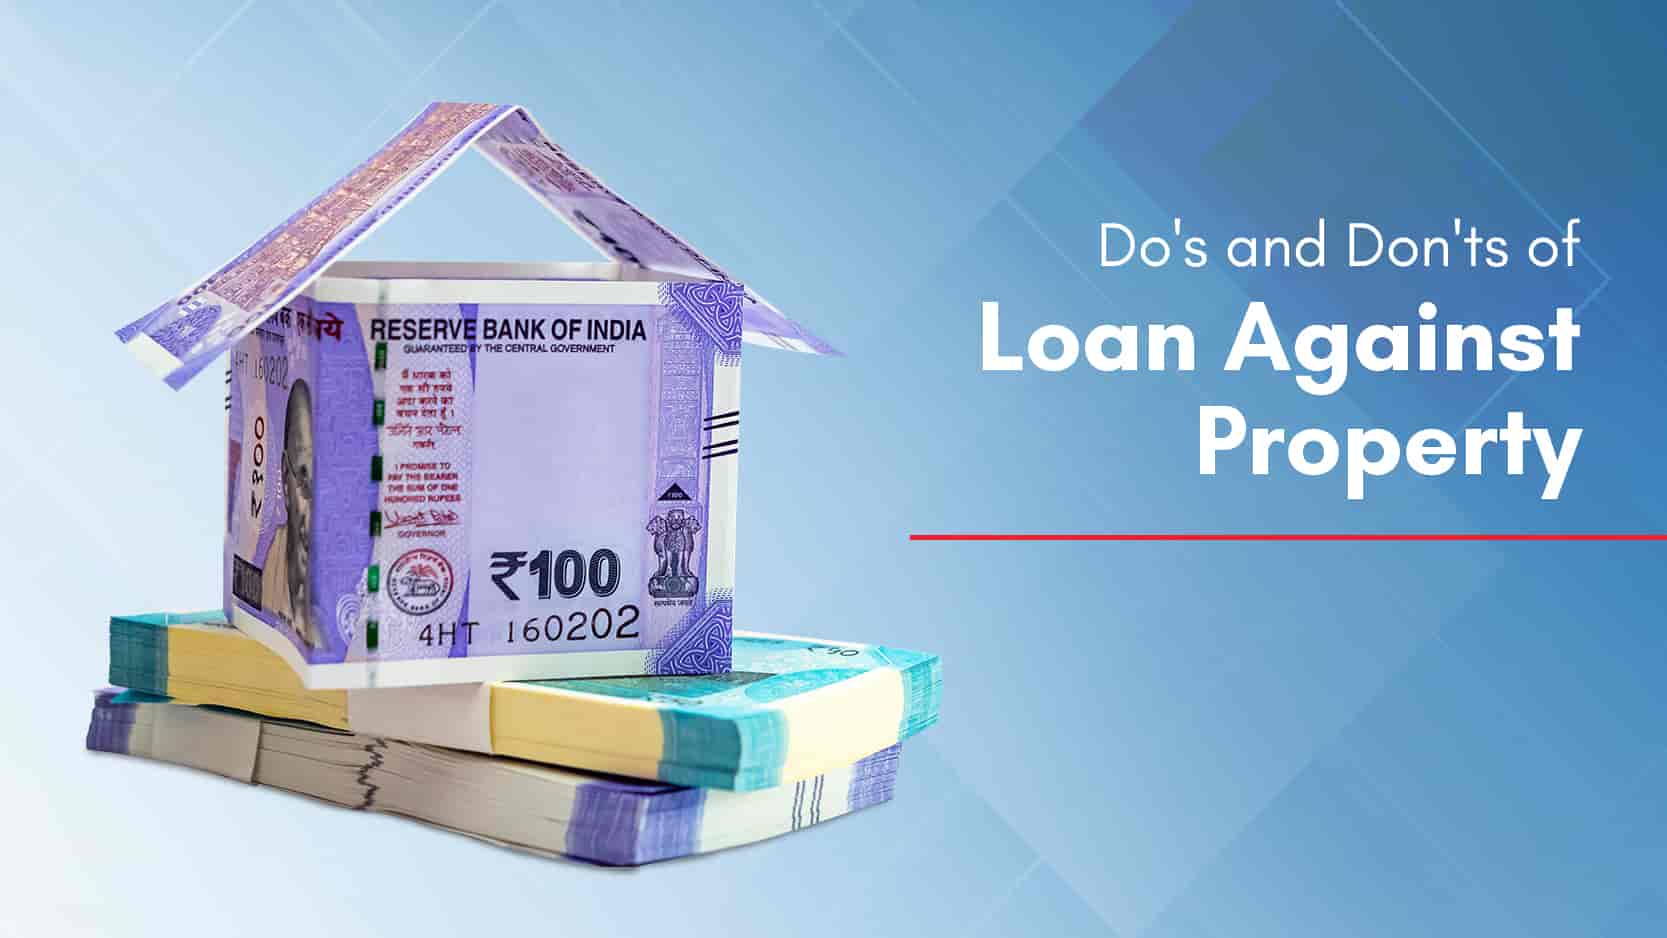 Do’s and Don'ts of Loan Against Property